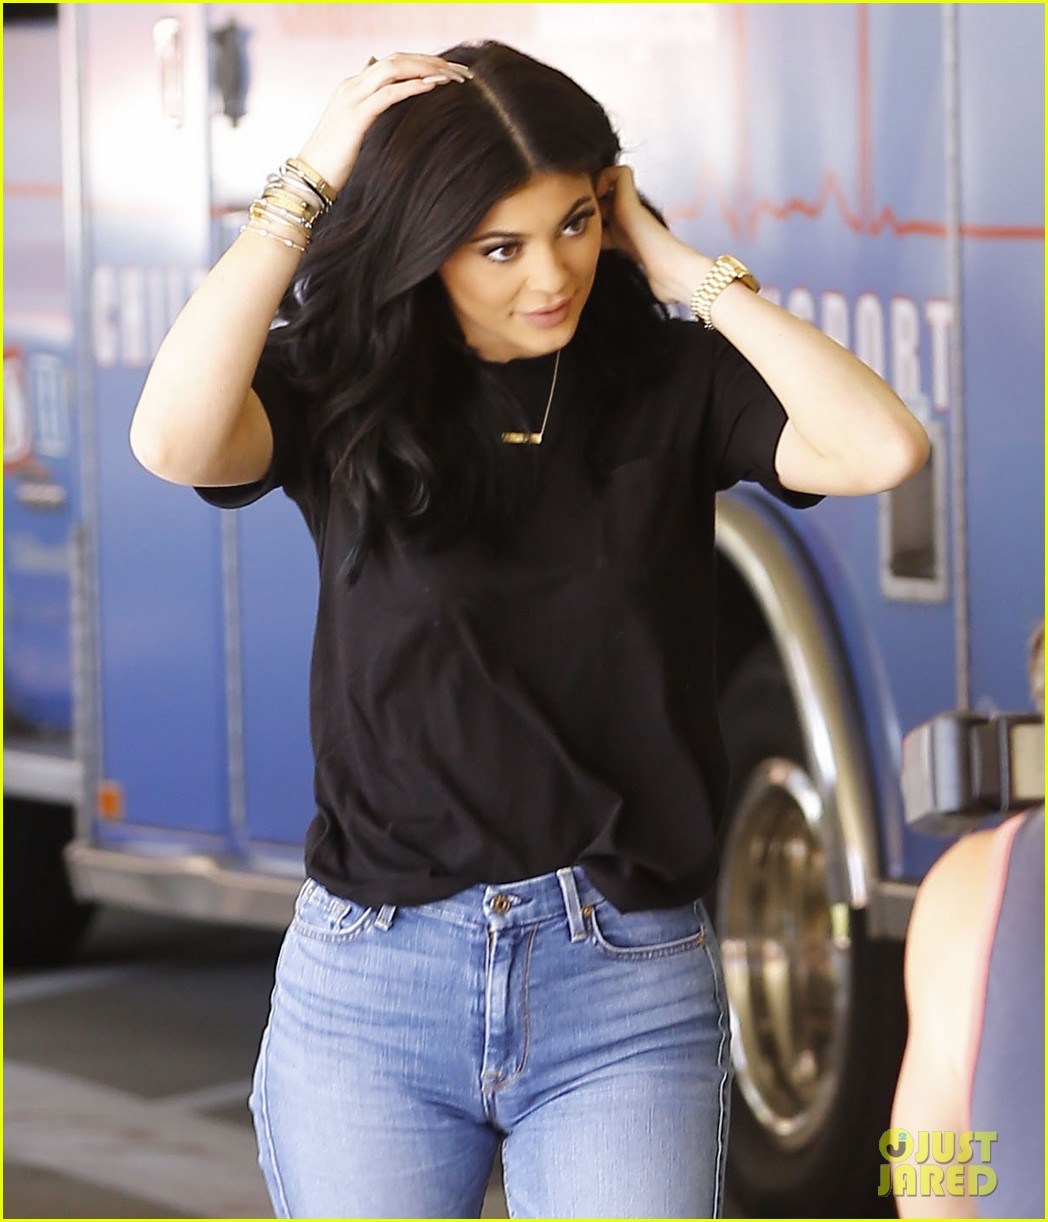 christopher wiegand recommends kylie jenner camel toe pic